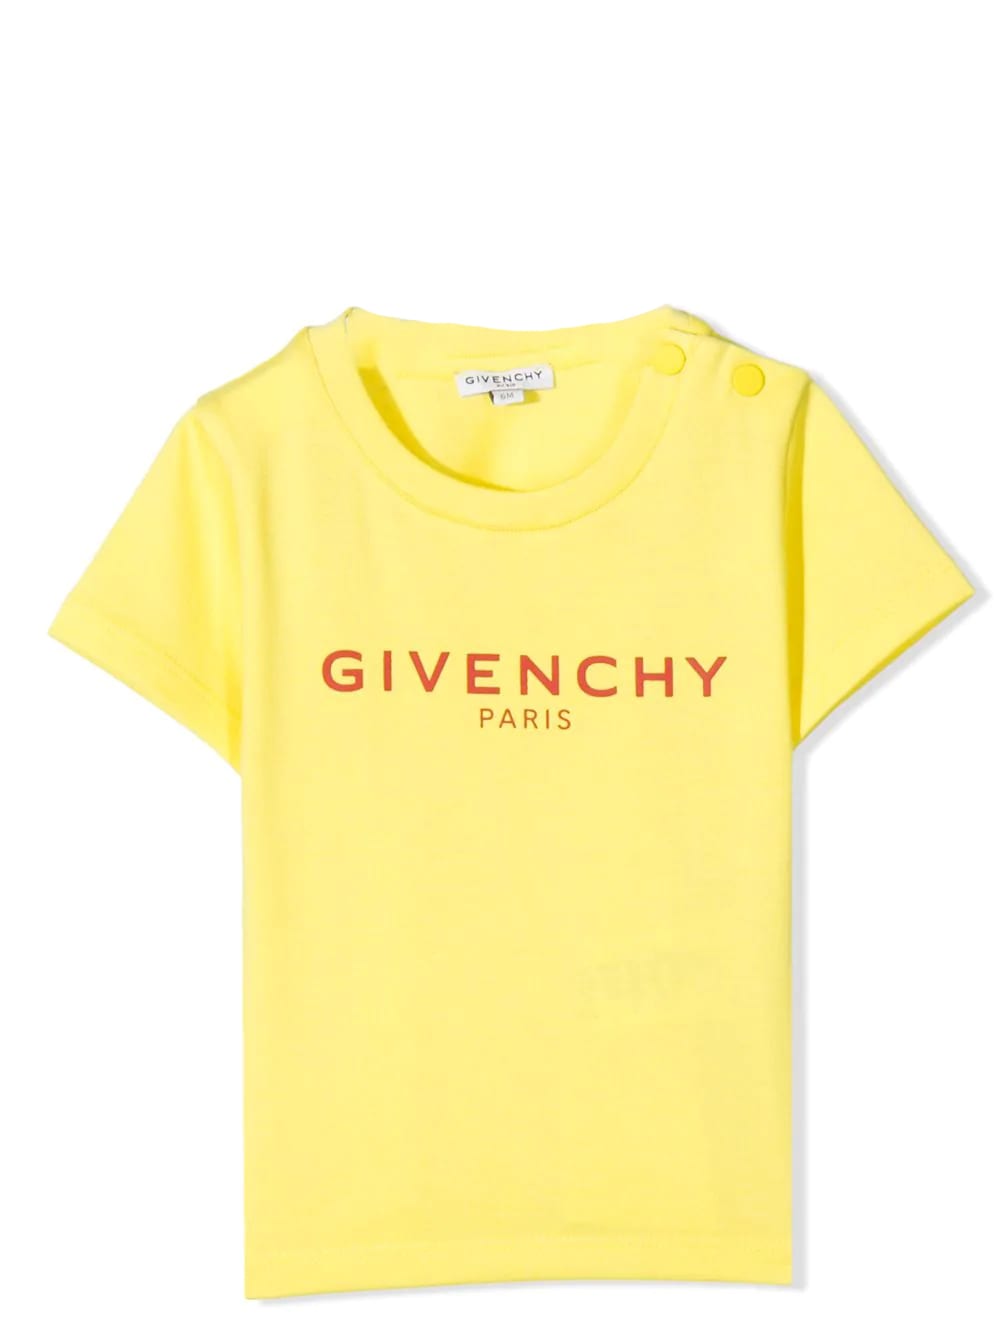 GIVENCHY T-SHIRT WITH PRINT,H051M16 508